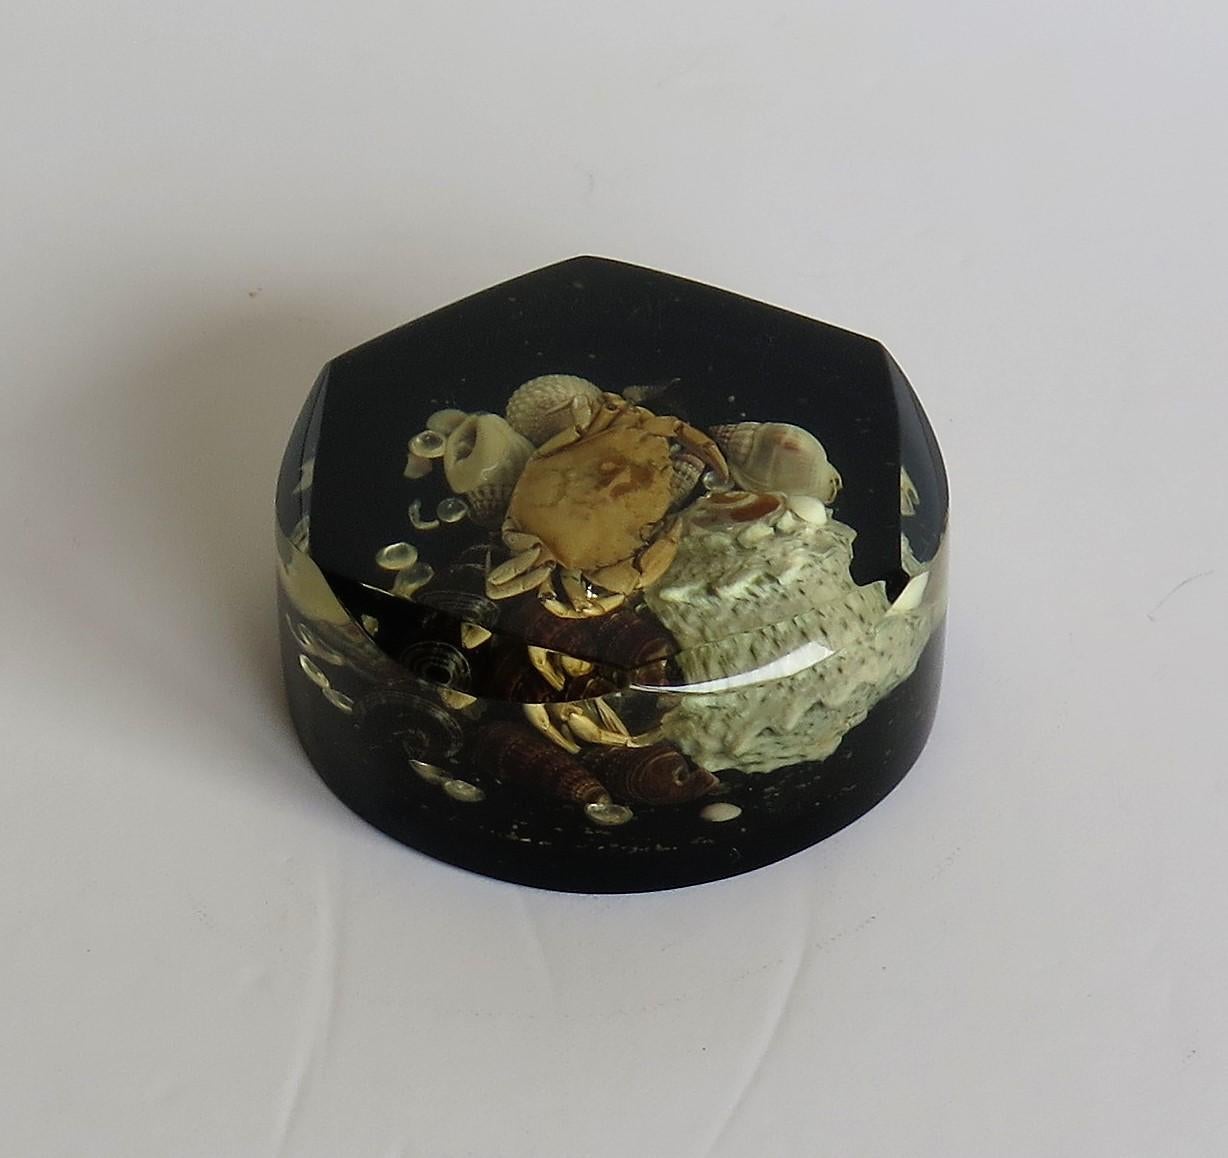 20th Century Paperweight with Seashore Theme Handmade with Real Sea Shells & Crab, circa 1970